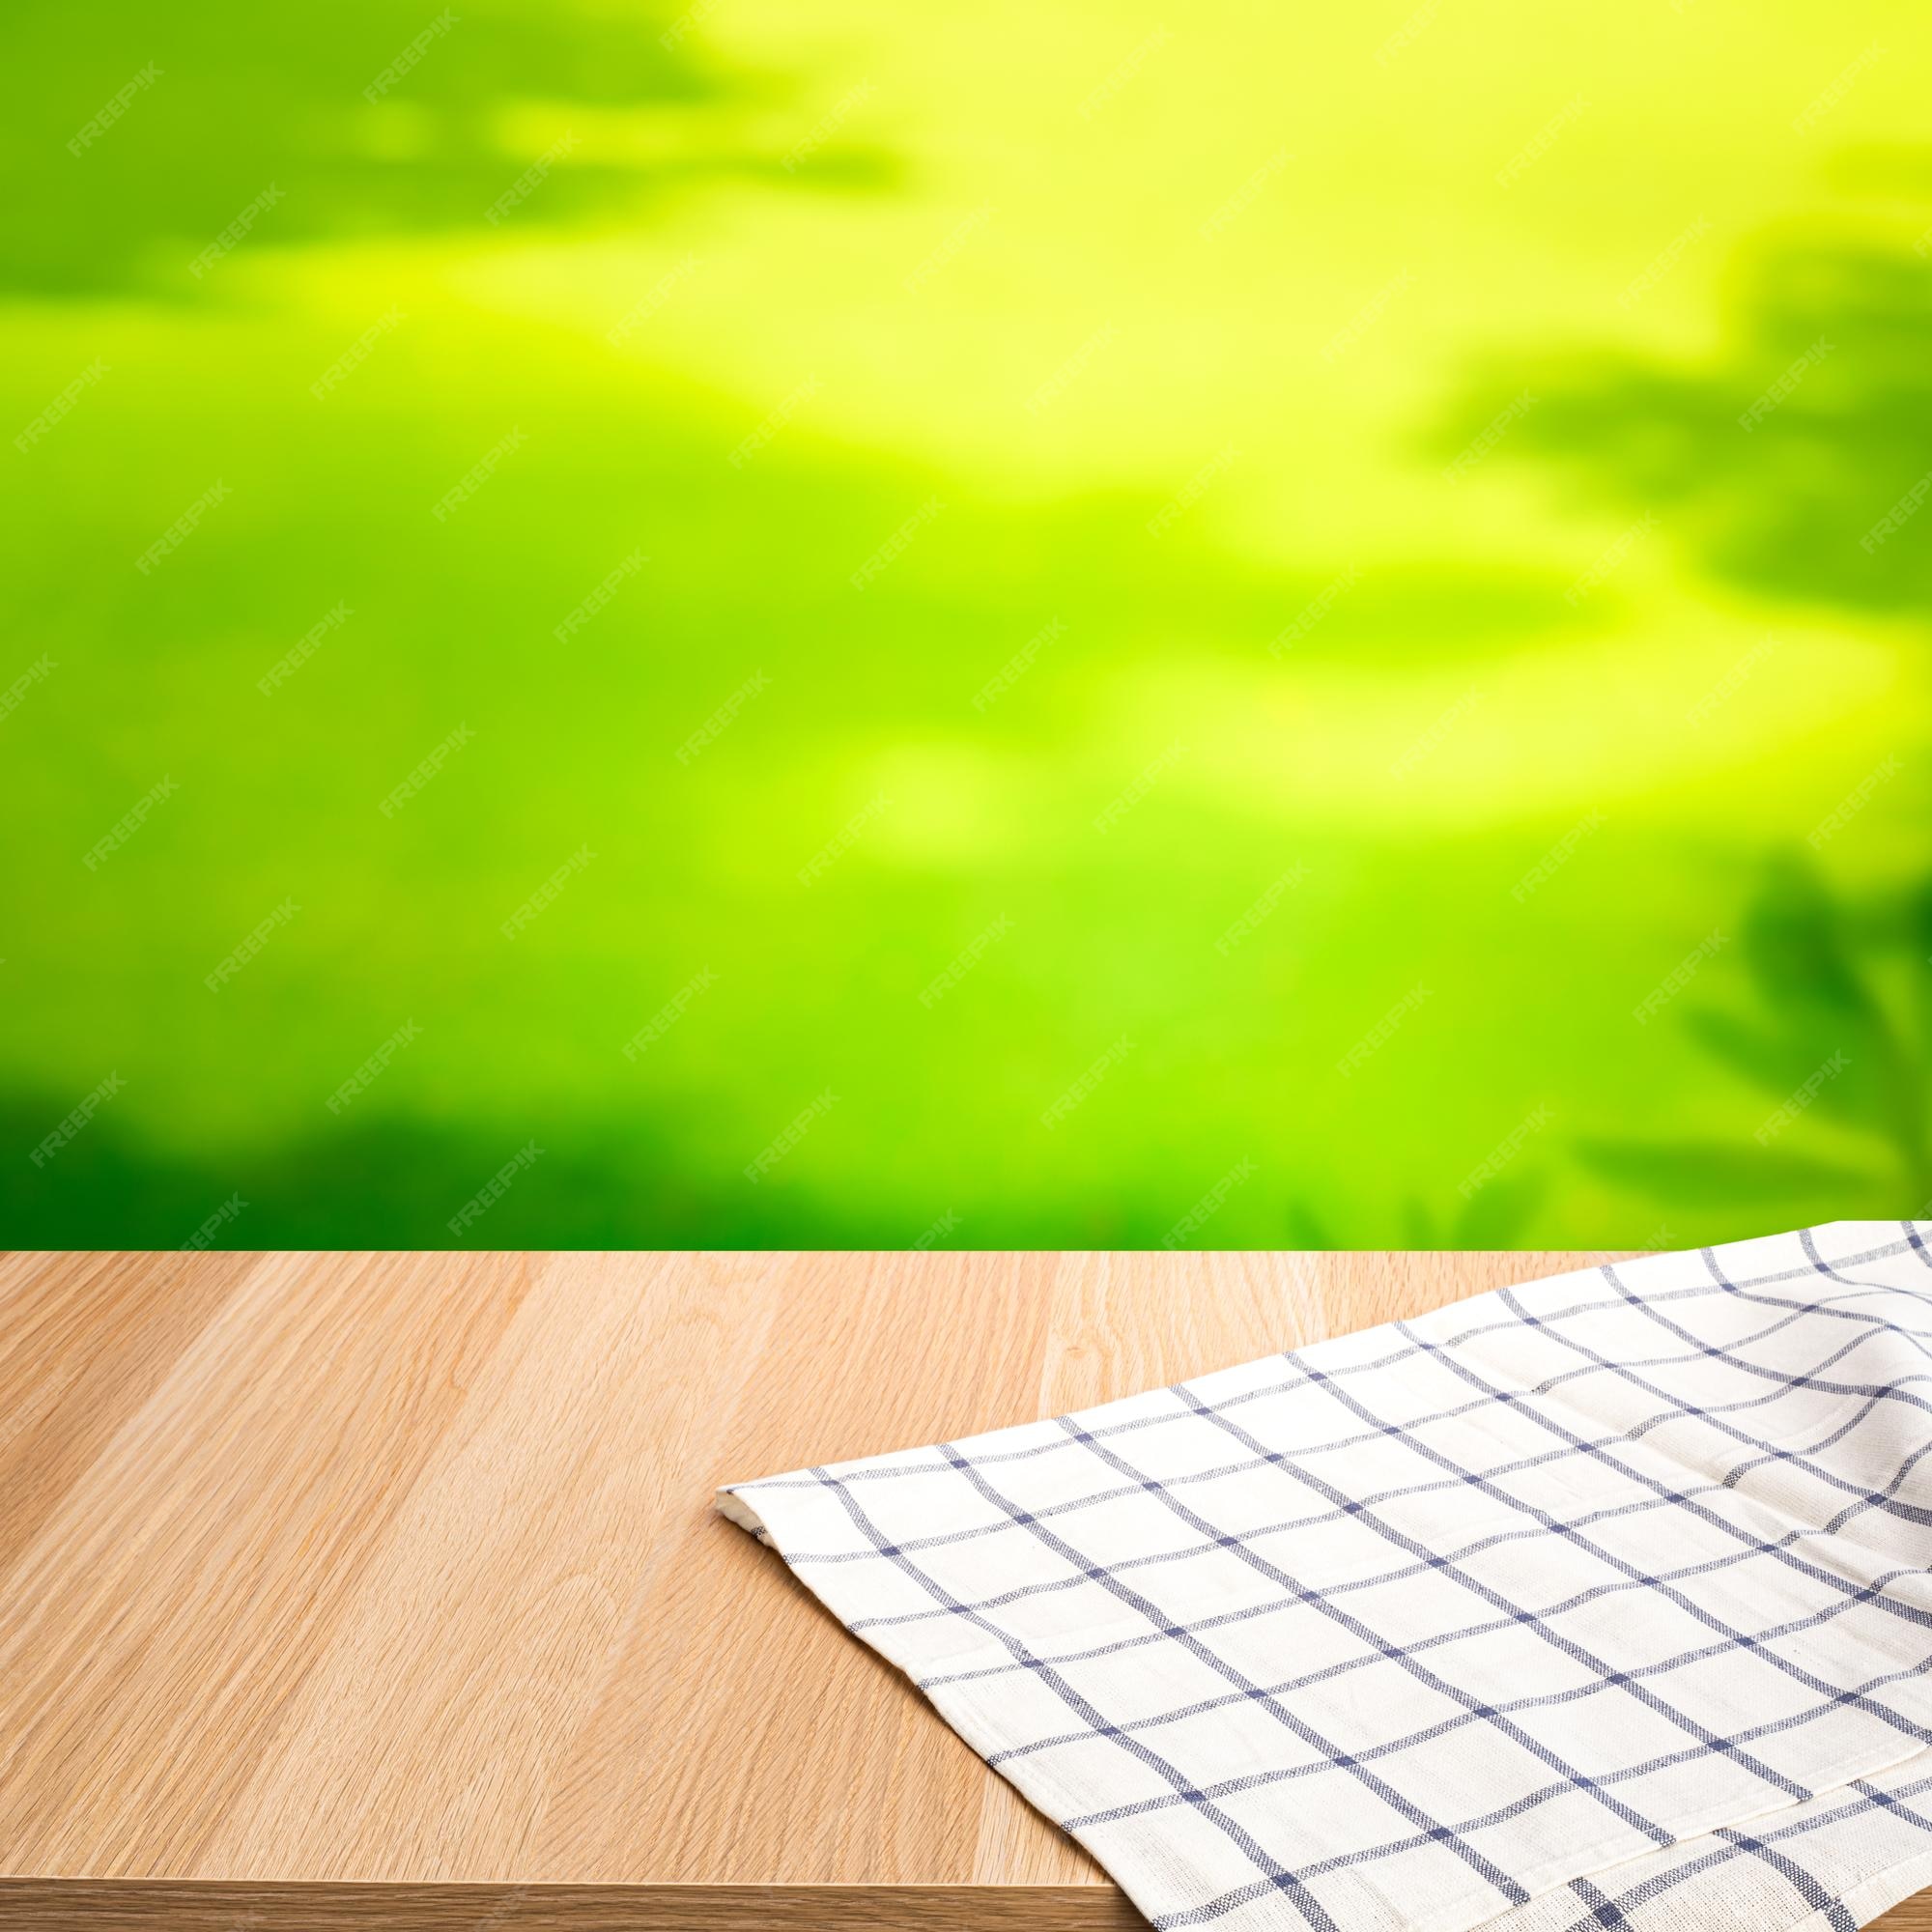 Premium Photo | Table and fabriccloth and blur green lawn backgrounddesign  for key visual food and menu